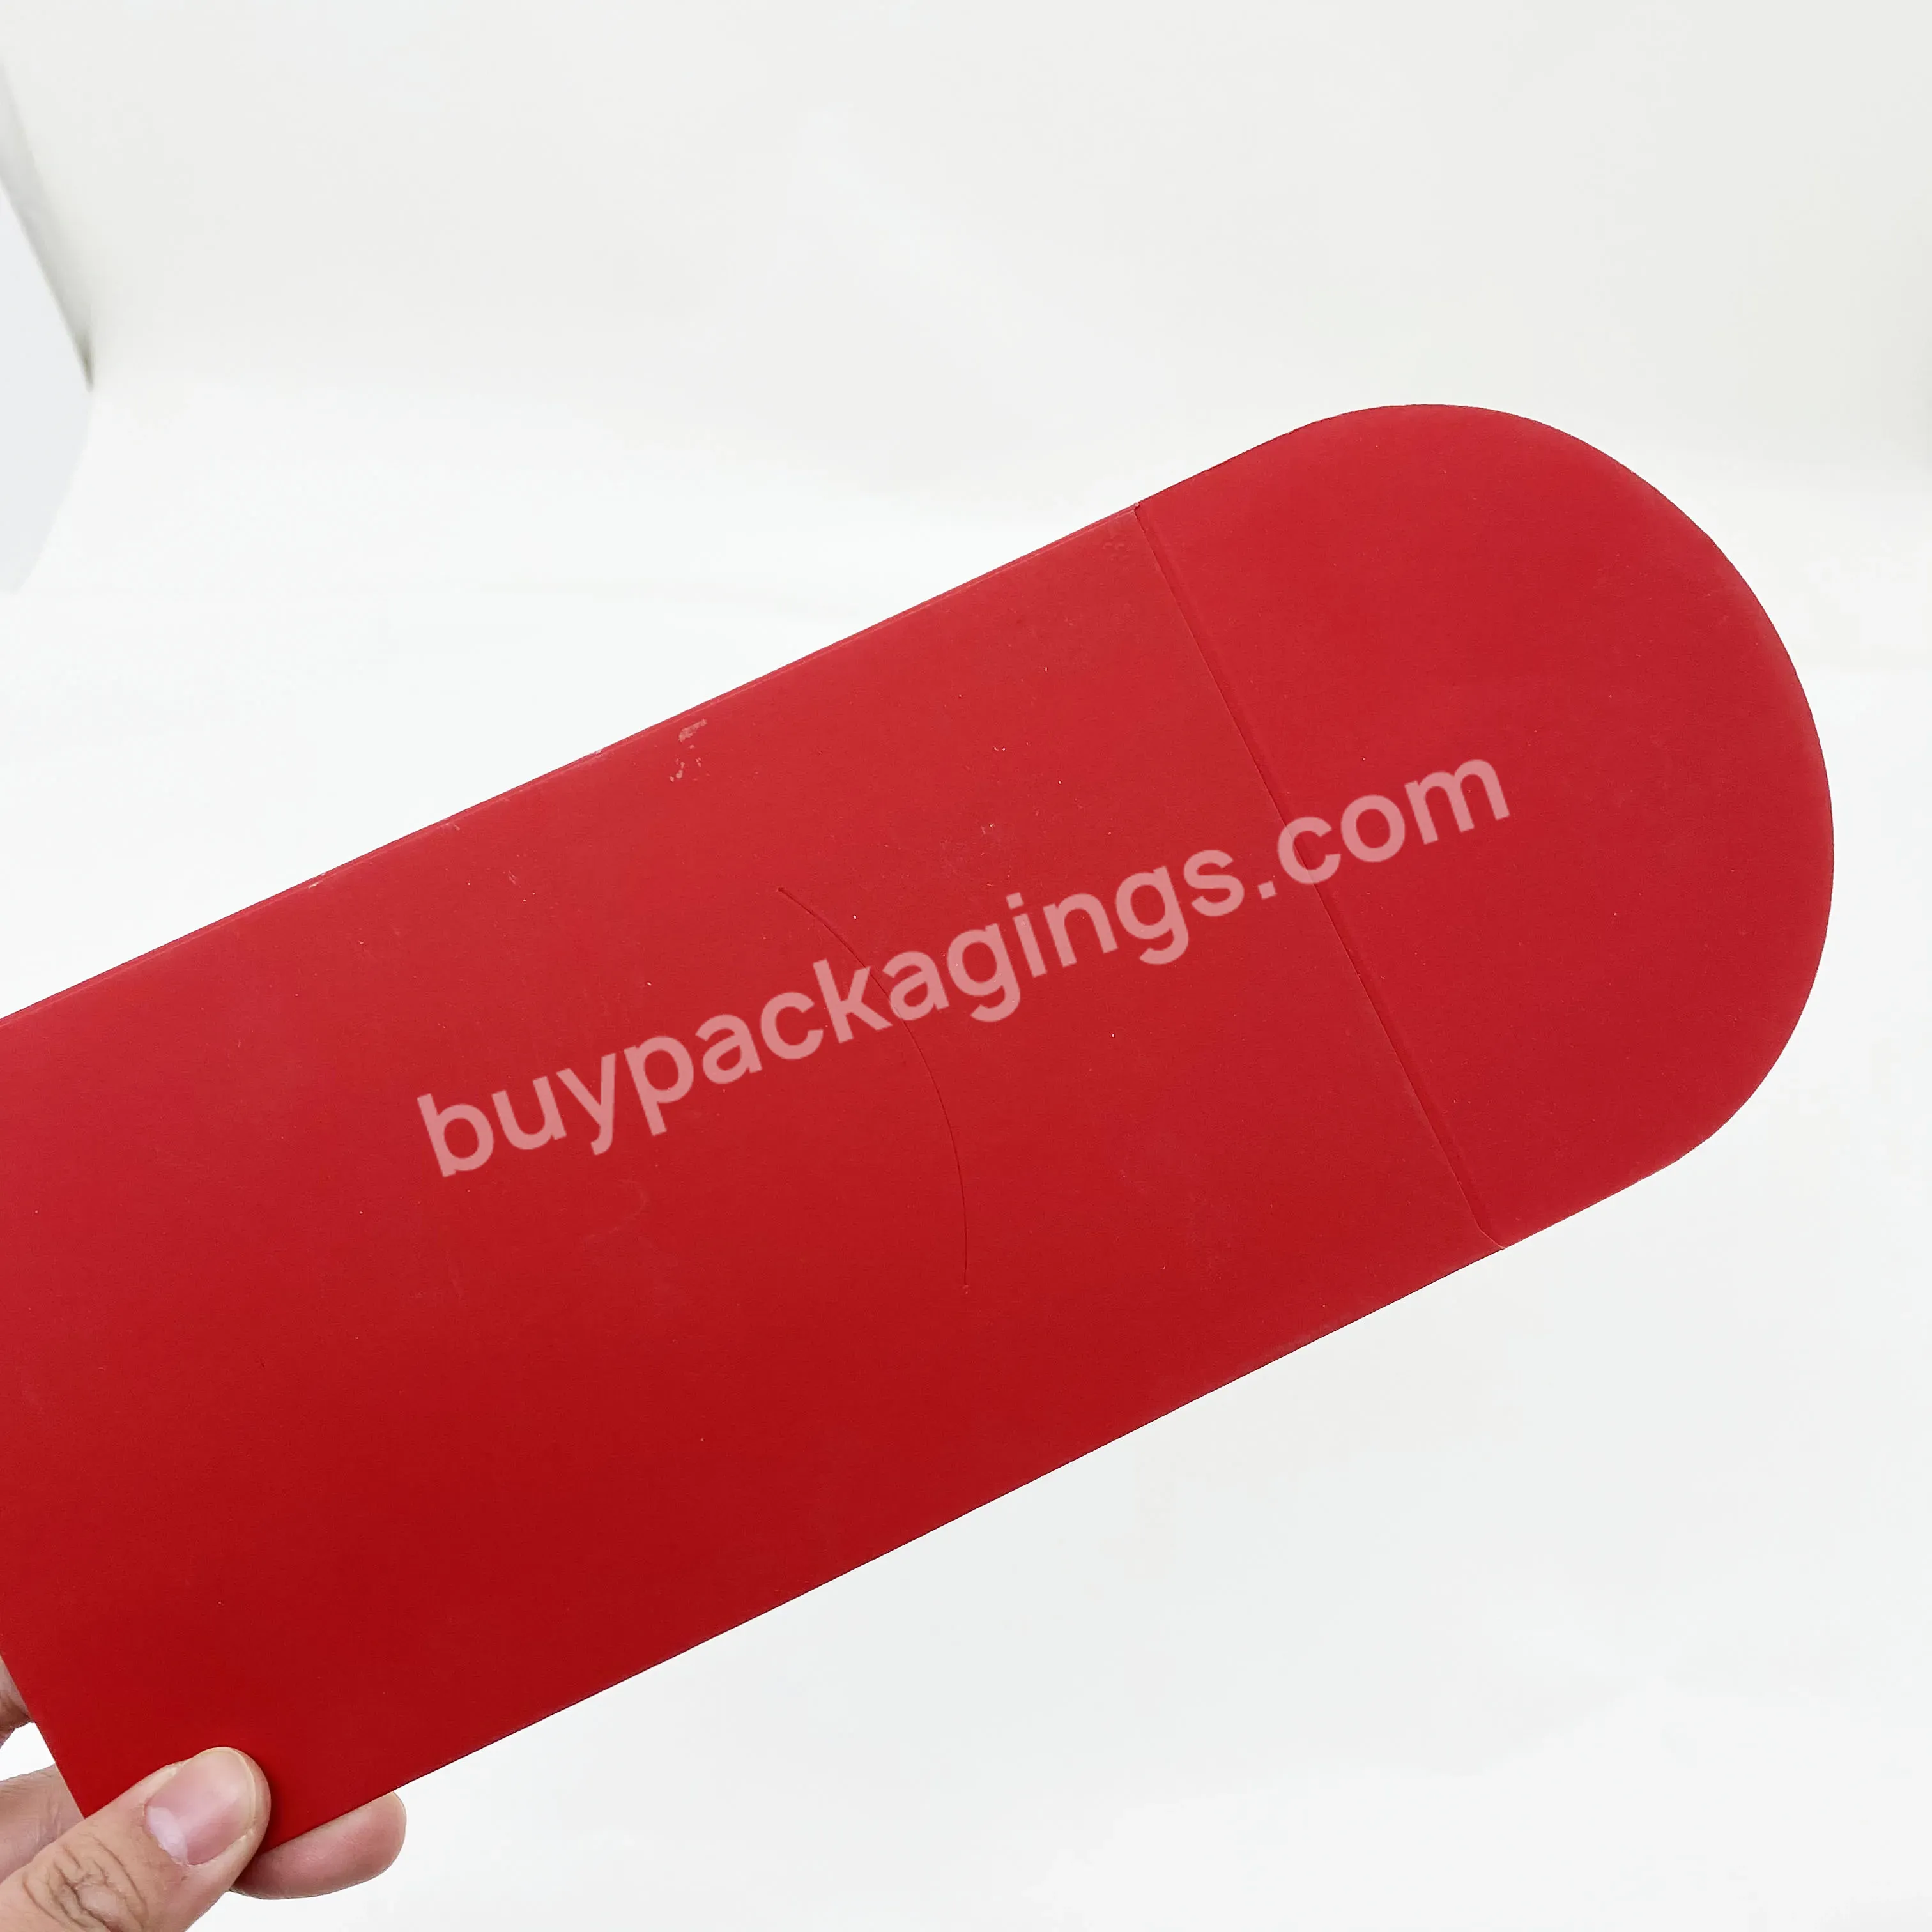 2023 2024 Velvet Laminated Chinese Lucky Paper Money Envelope Hot Stamp Red Packet Customized - Buy Paper Money Envelope,Red Packet,Red Packet Customized.